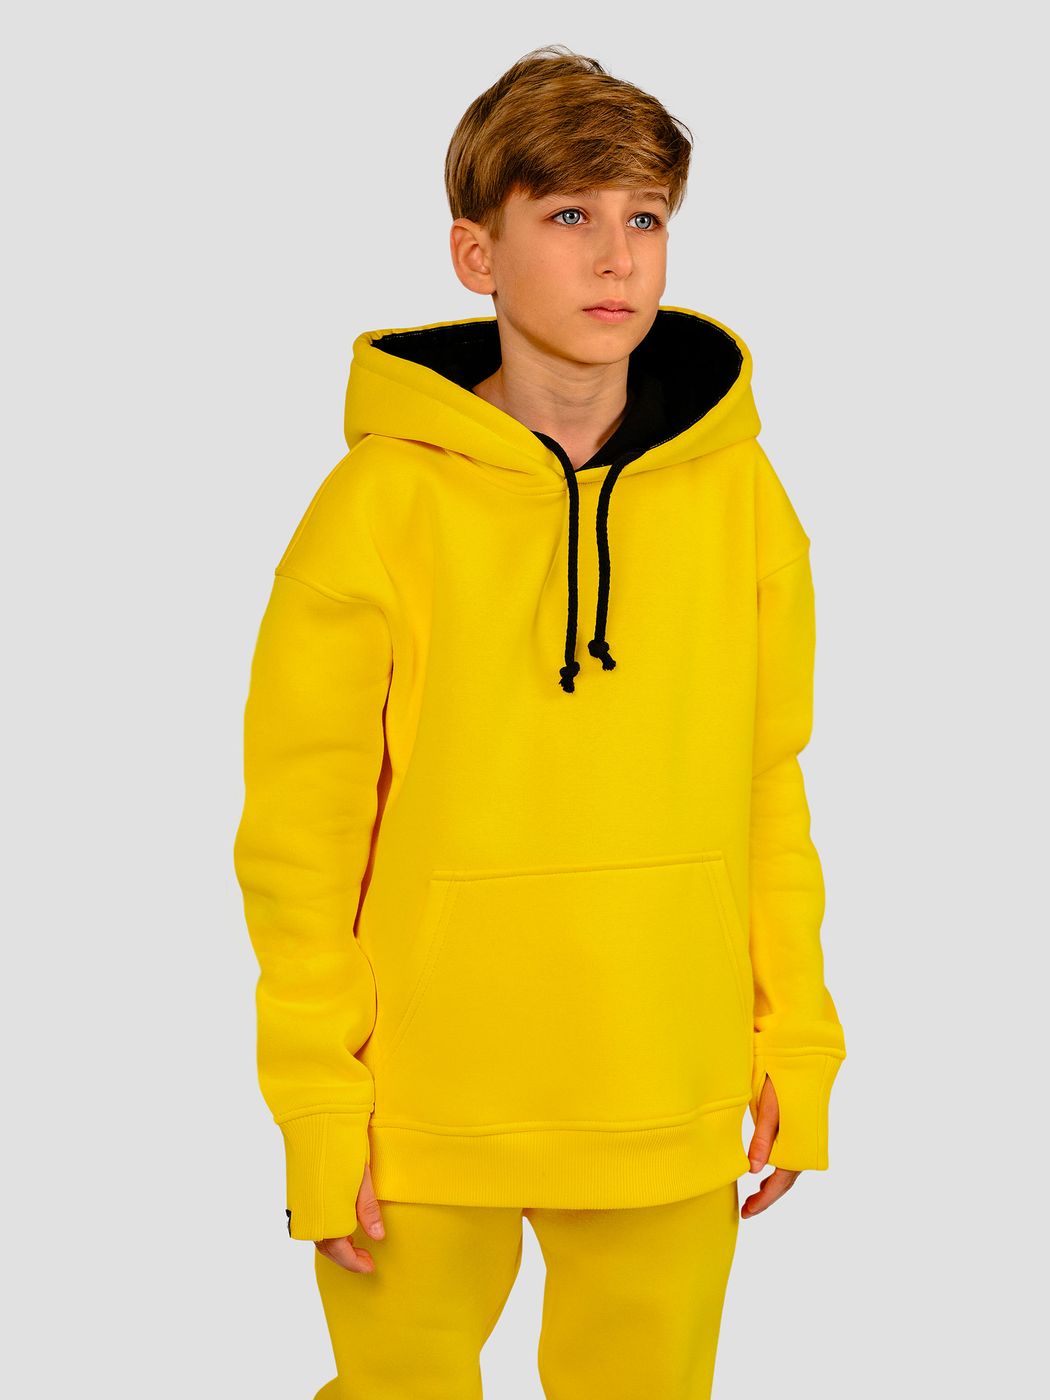 Kid's suit hoodie and pants yellow, Yellow, 3XS (86-92 cm), 92